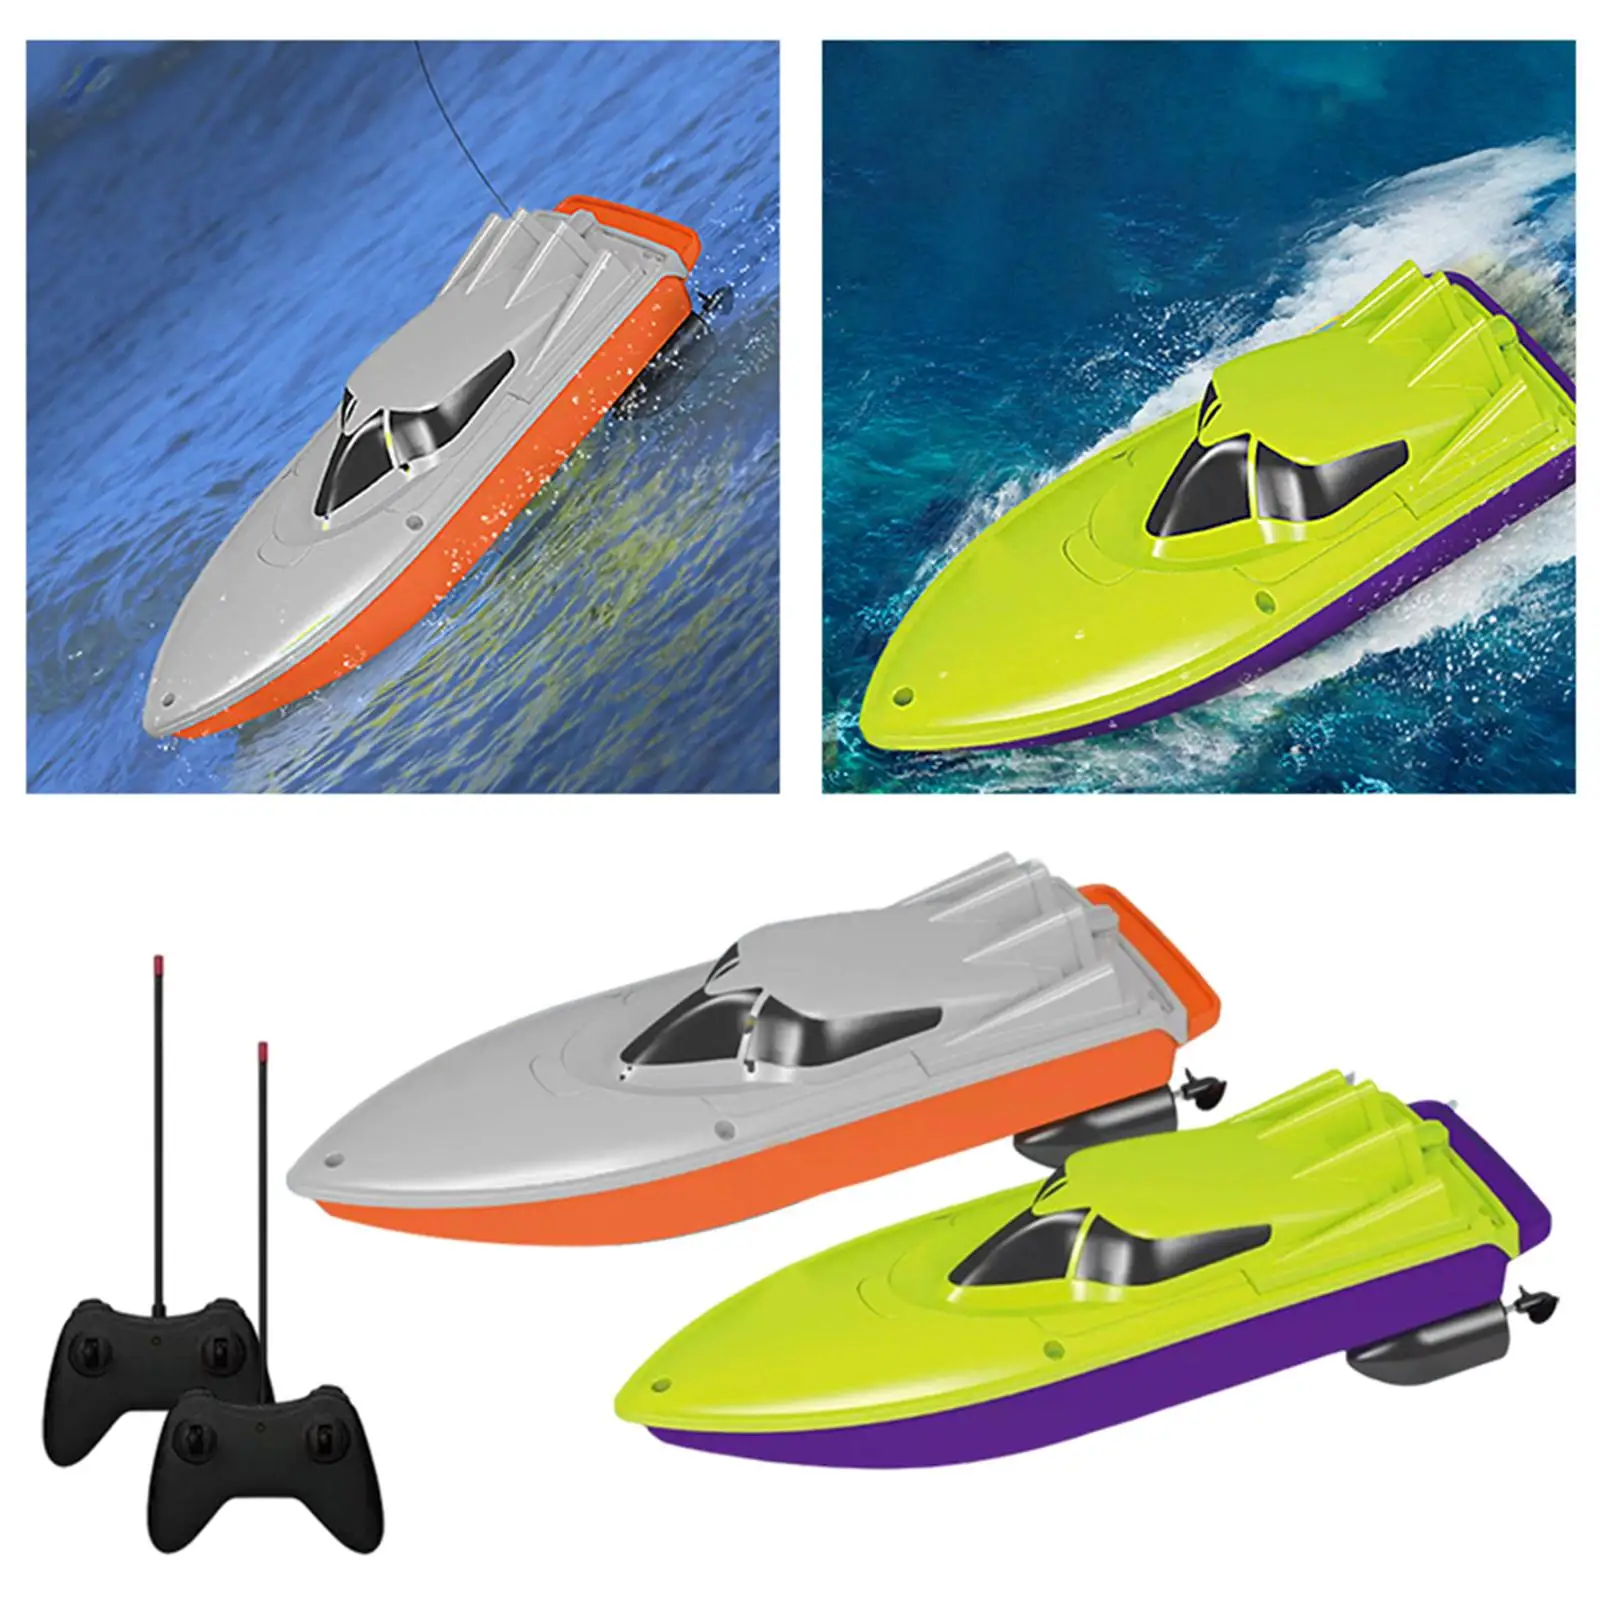 2.4G RC Boat Waterproof High RC Race Boat 10+ MPH Double Motor Remote Control Boat for Kids and Adults, River, Lakes,